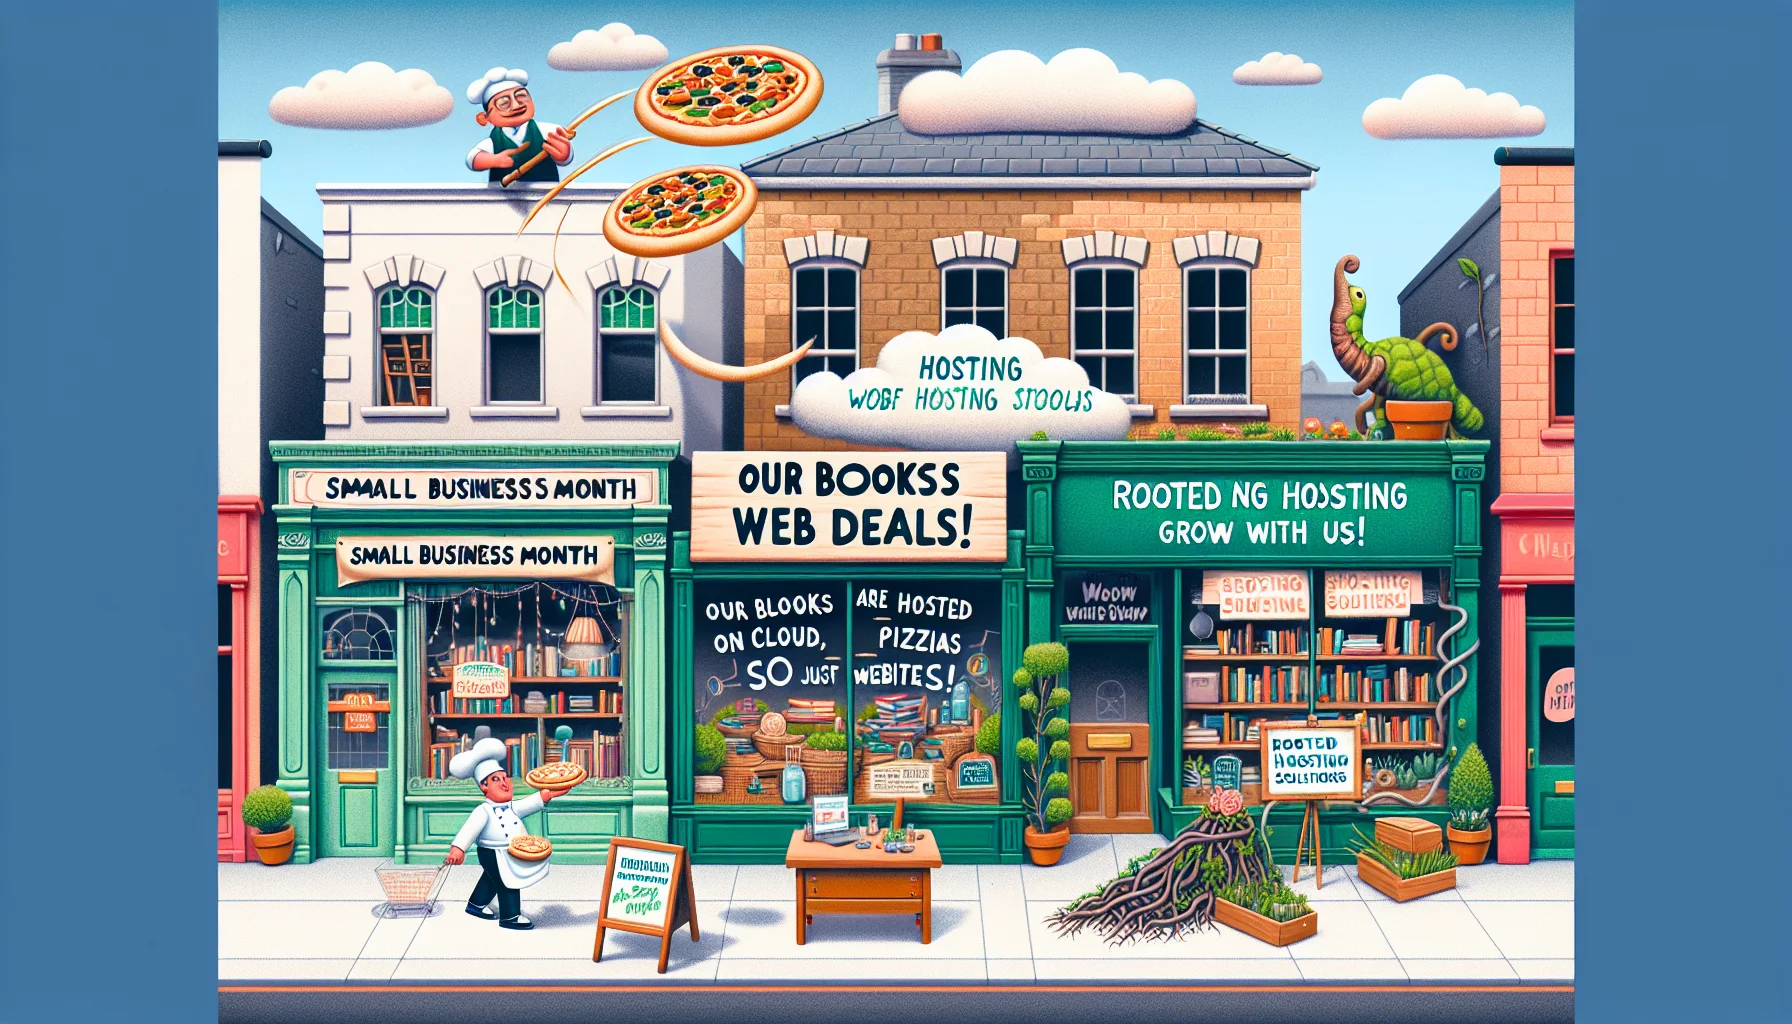 Generate an image of a lively cityscape where various small businesses exhibit quirky and amusing signs promoting 'Small Business Month'. There's a baker tossing pizza dough sky-high from his shop with the sign 'Hosting Web Deals, not just Pizzas!'. Next door, a charming bookstore has a banner with a bookworm lounging on a cloud symbolising cloud hosting and reads 'Our Books are Hosted on Clouds, So can your Website!'. Across the street, a green florist's window displays a plant with cables as roots, captioned 'Rooted Hosting Solutions, Grow With Us!' The vibe is playful, appealing to small businesses.